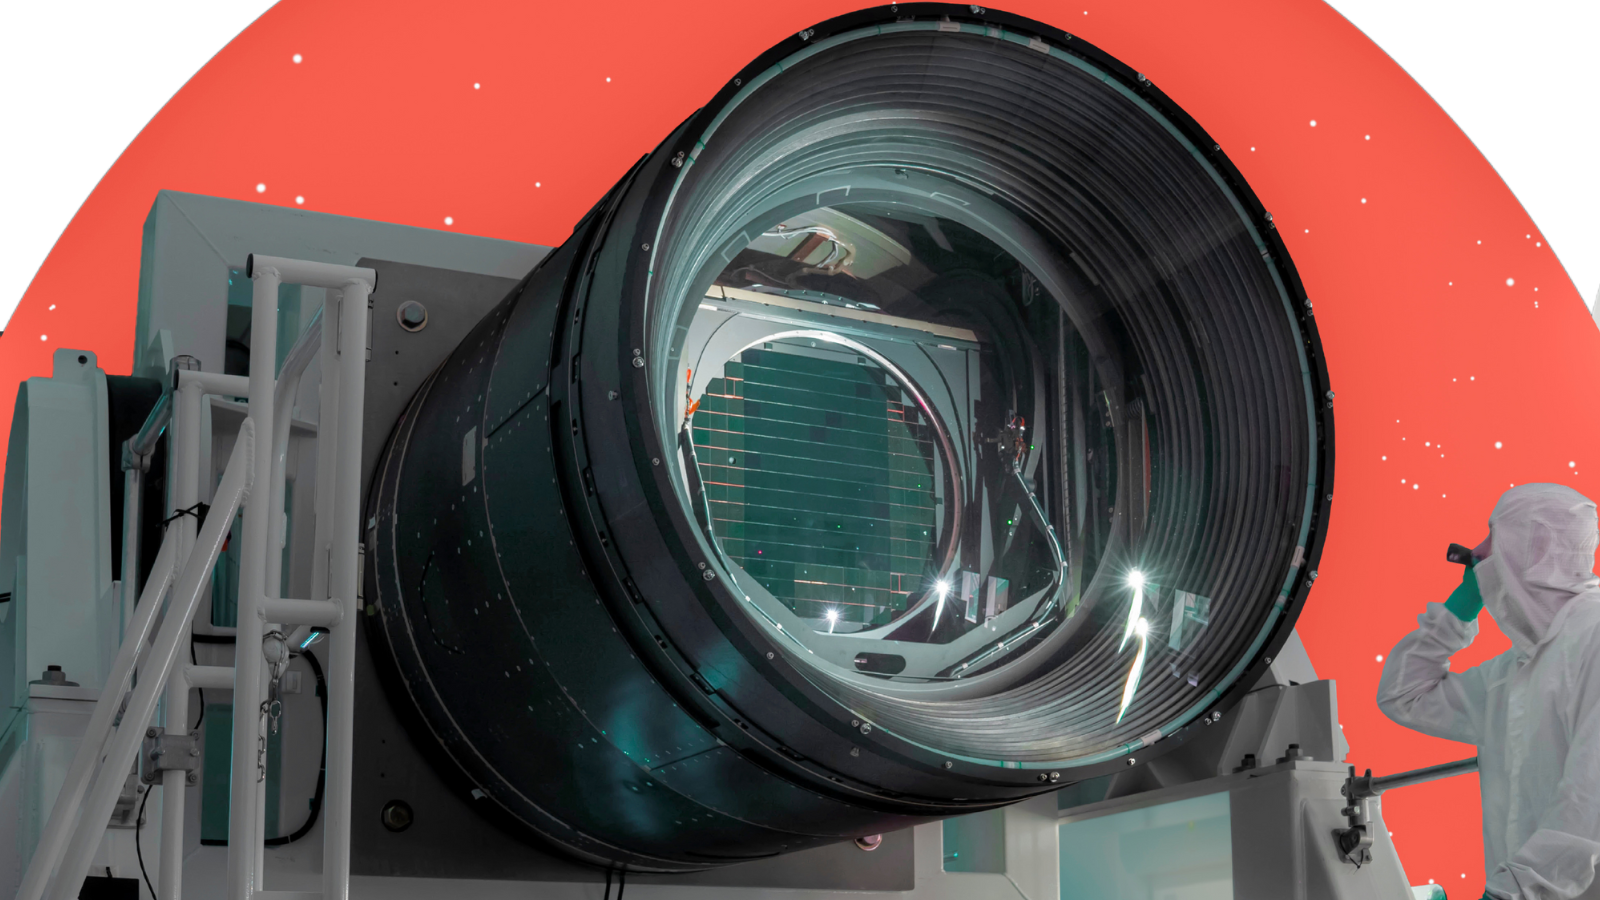 The world’s largest digital camera is ready to investigate the dark universe Space